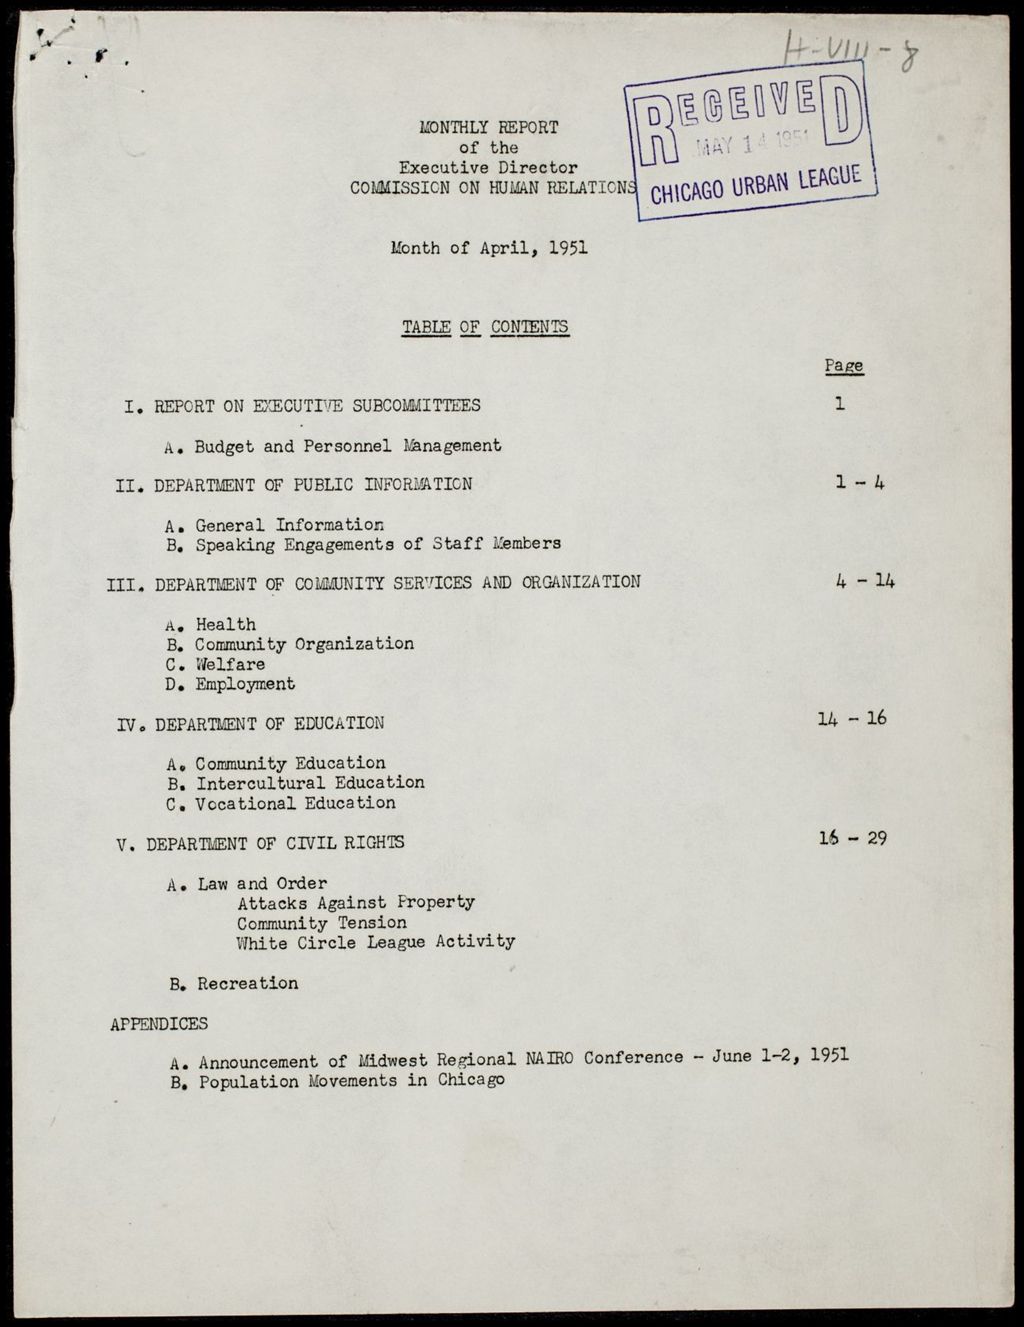 Miniature of Chicago Commission on Human Relations Executive Director reports, 1951 (Folder I-2793)